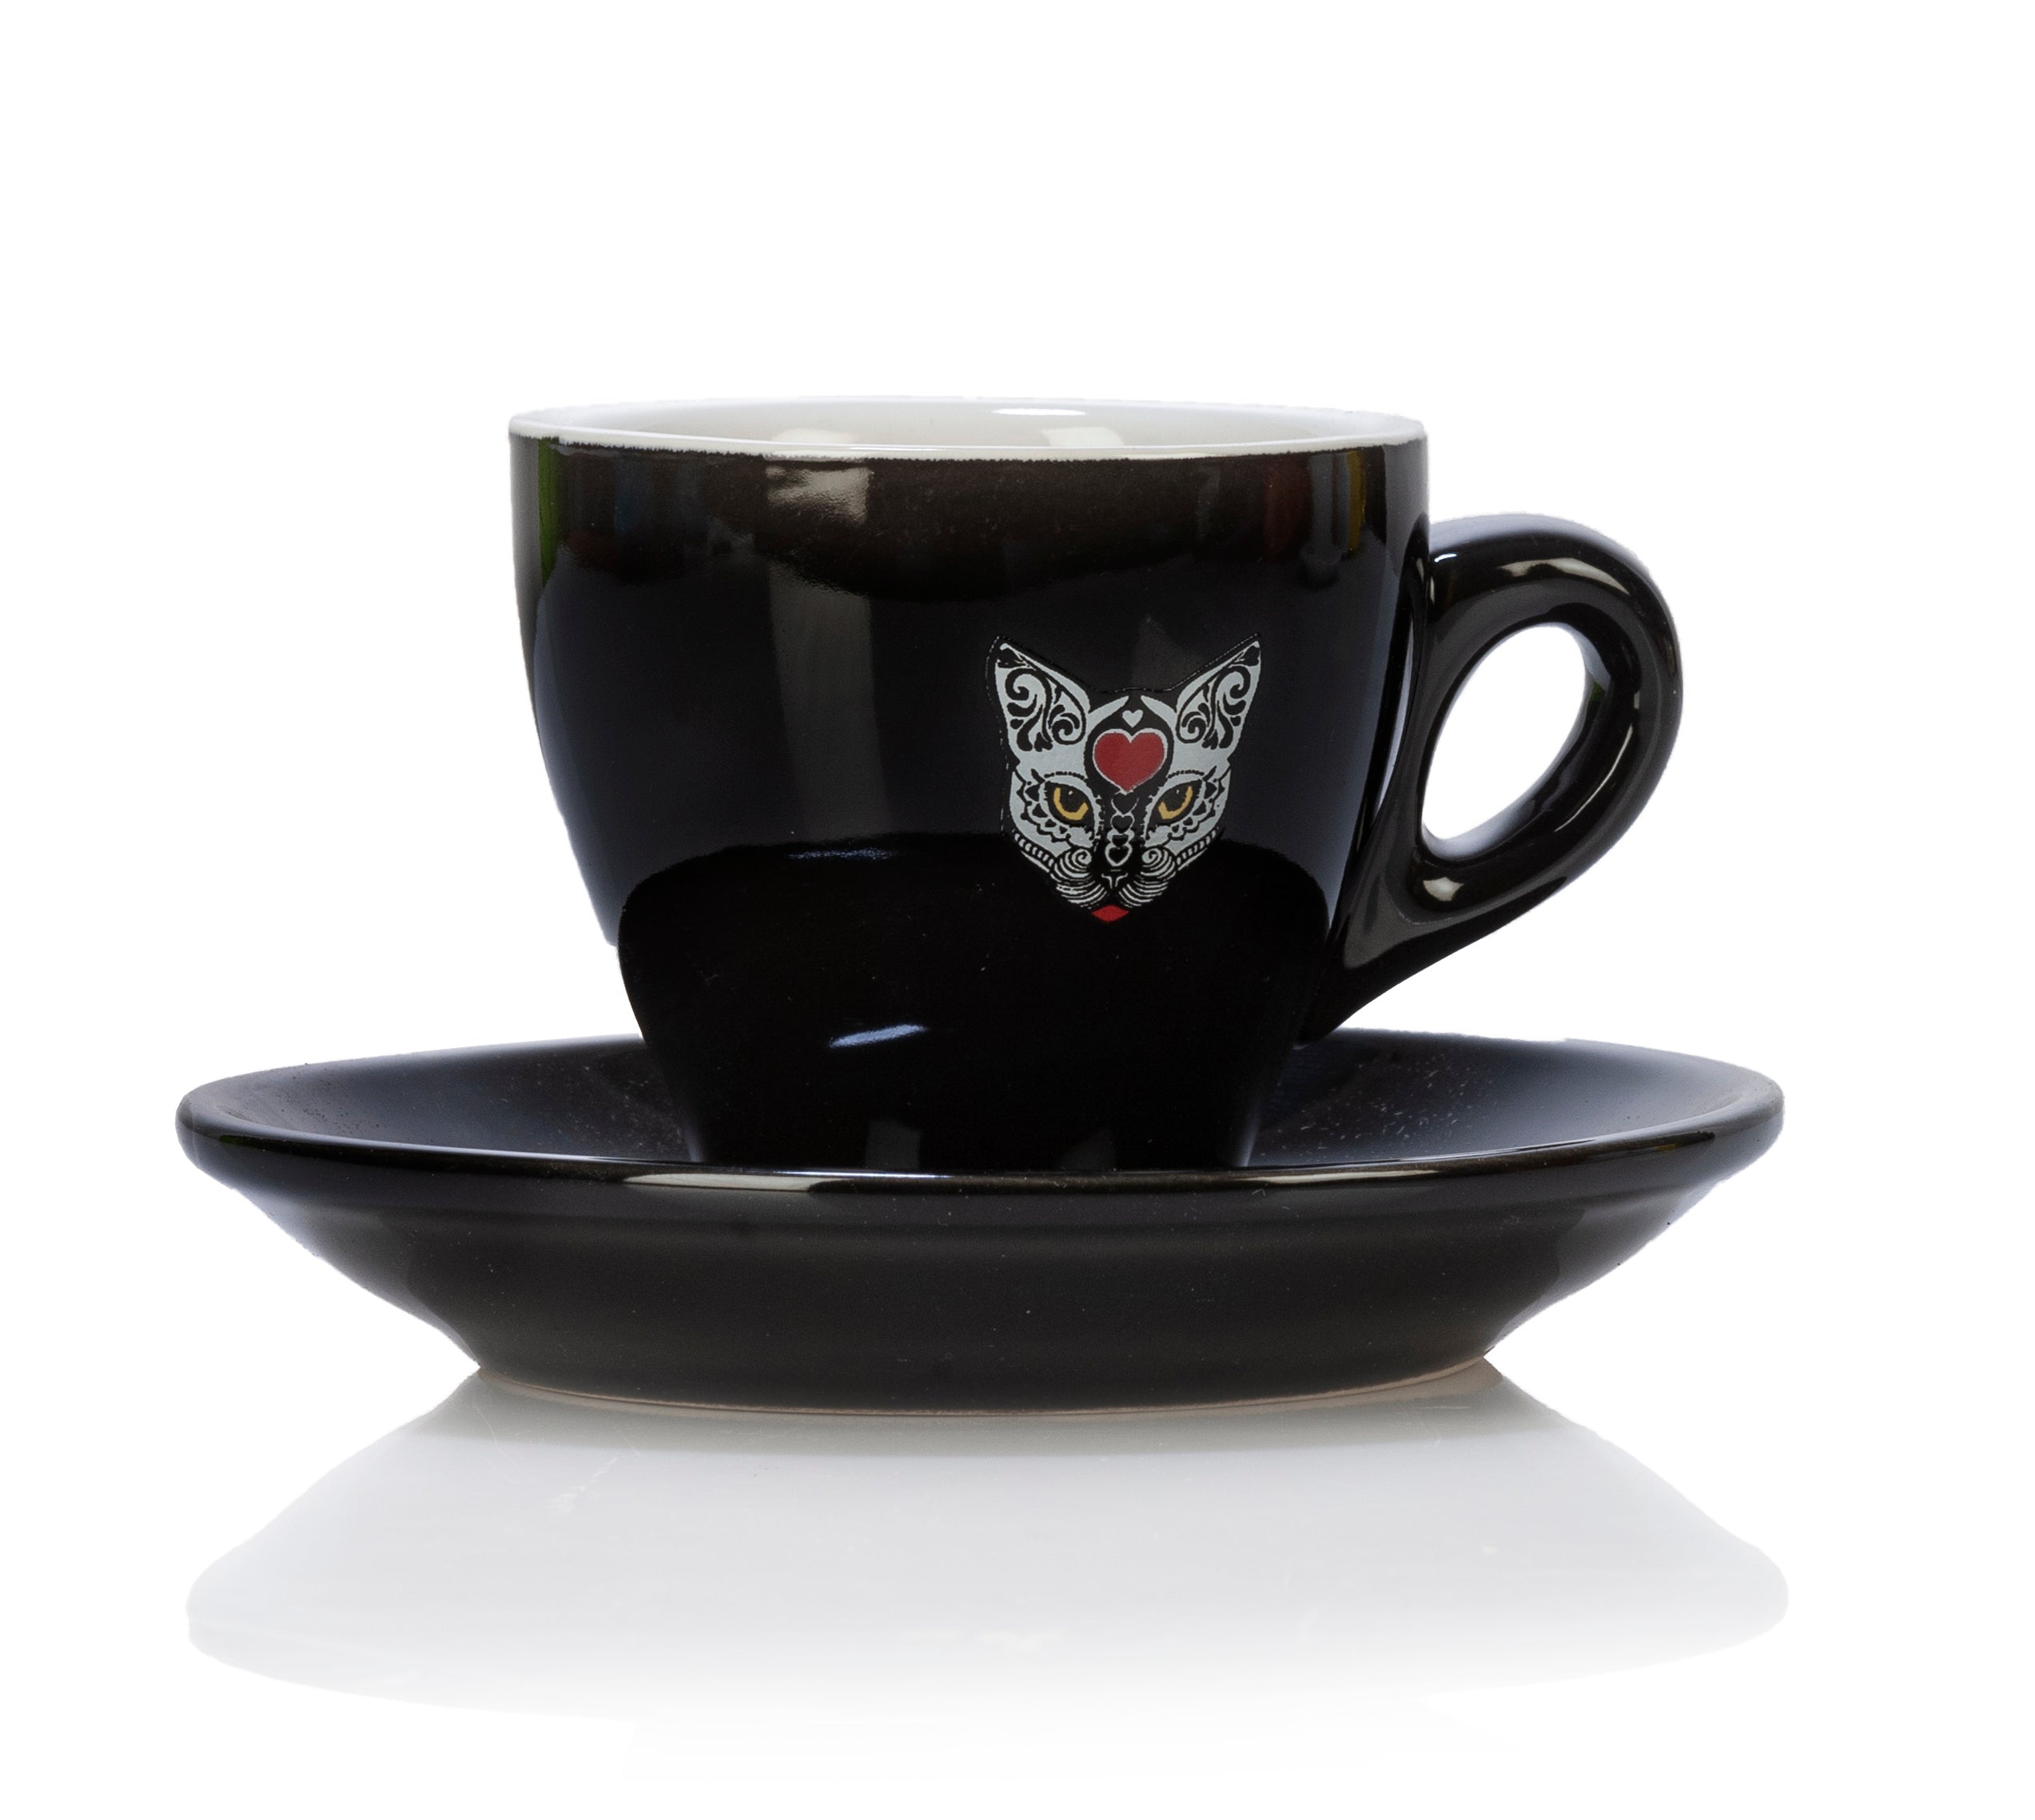 A black espresso cup with the Tre Gatti logo, a picture of a cat, printed on the side